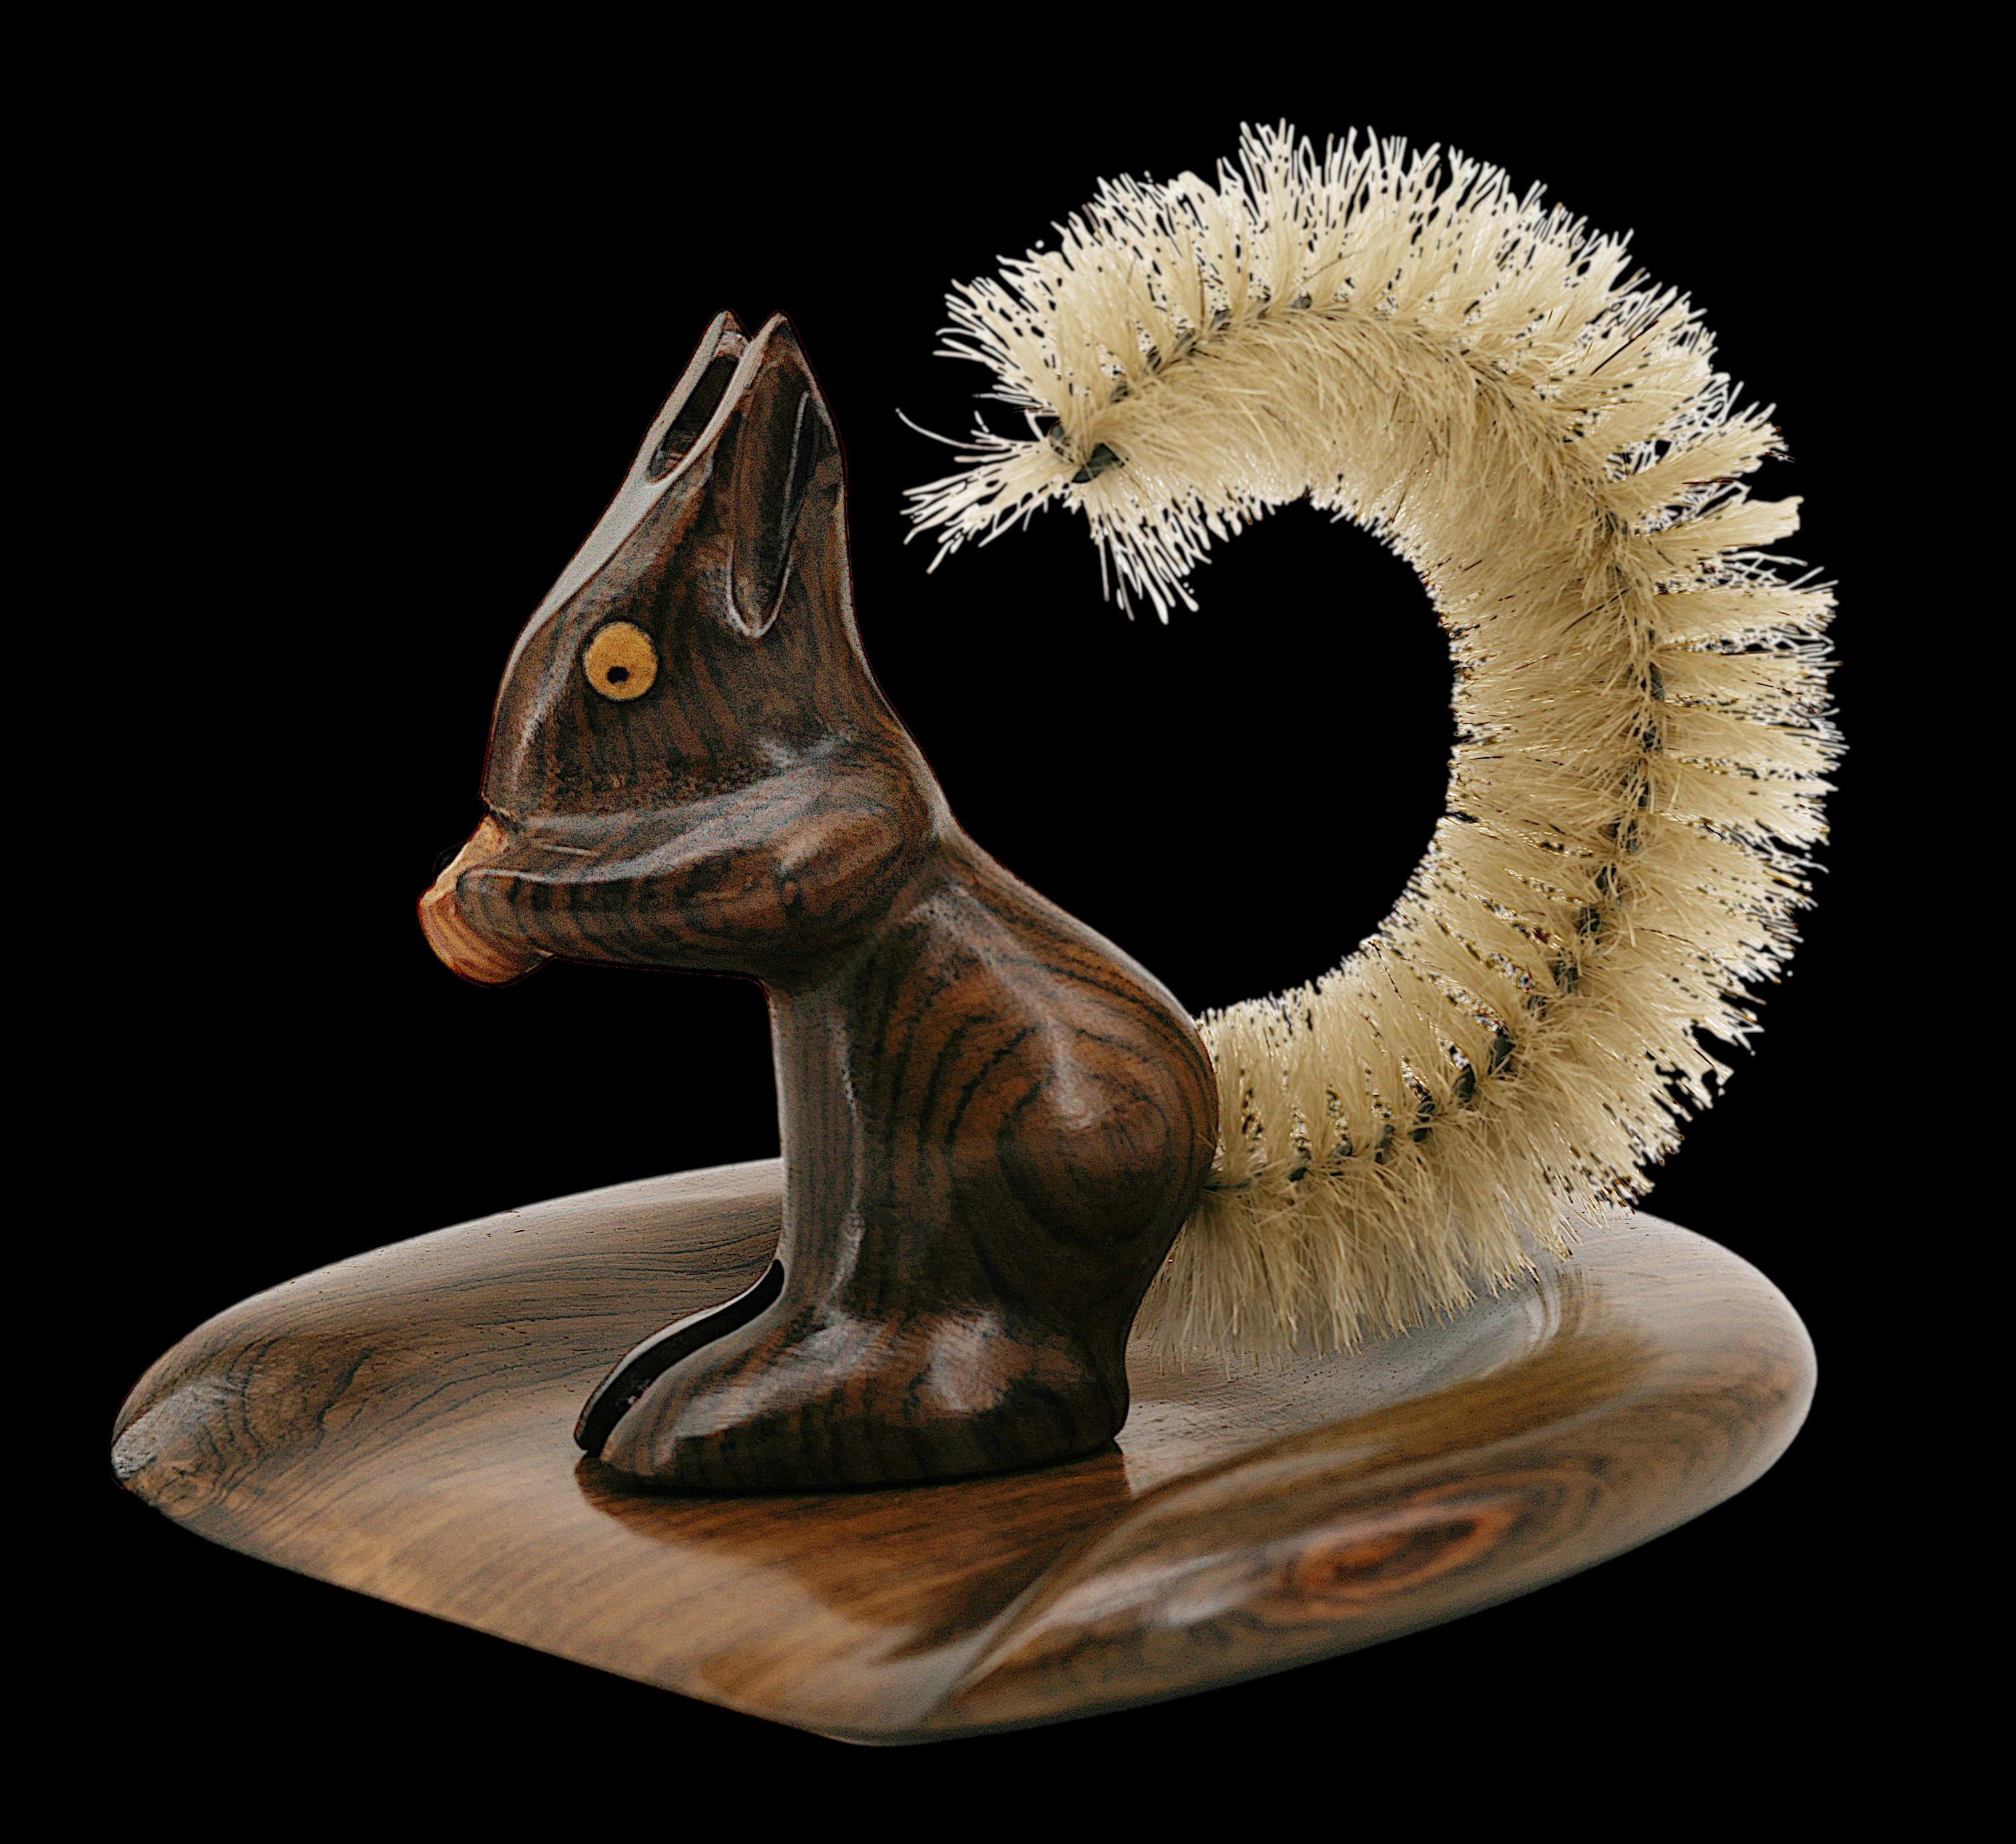 Large mid-century wooden squirrel brush & pan by Max MEDER (Paris), France, 1950s. Squirrel eating a nut. Noble woods. Measures: Squirrel - Height: 6.7